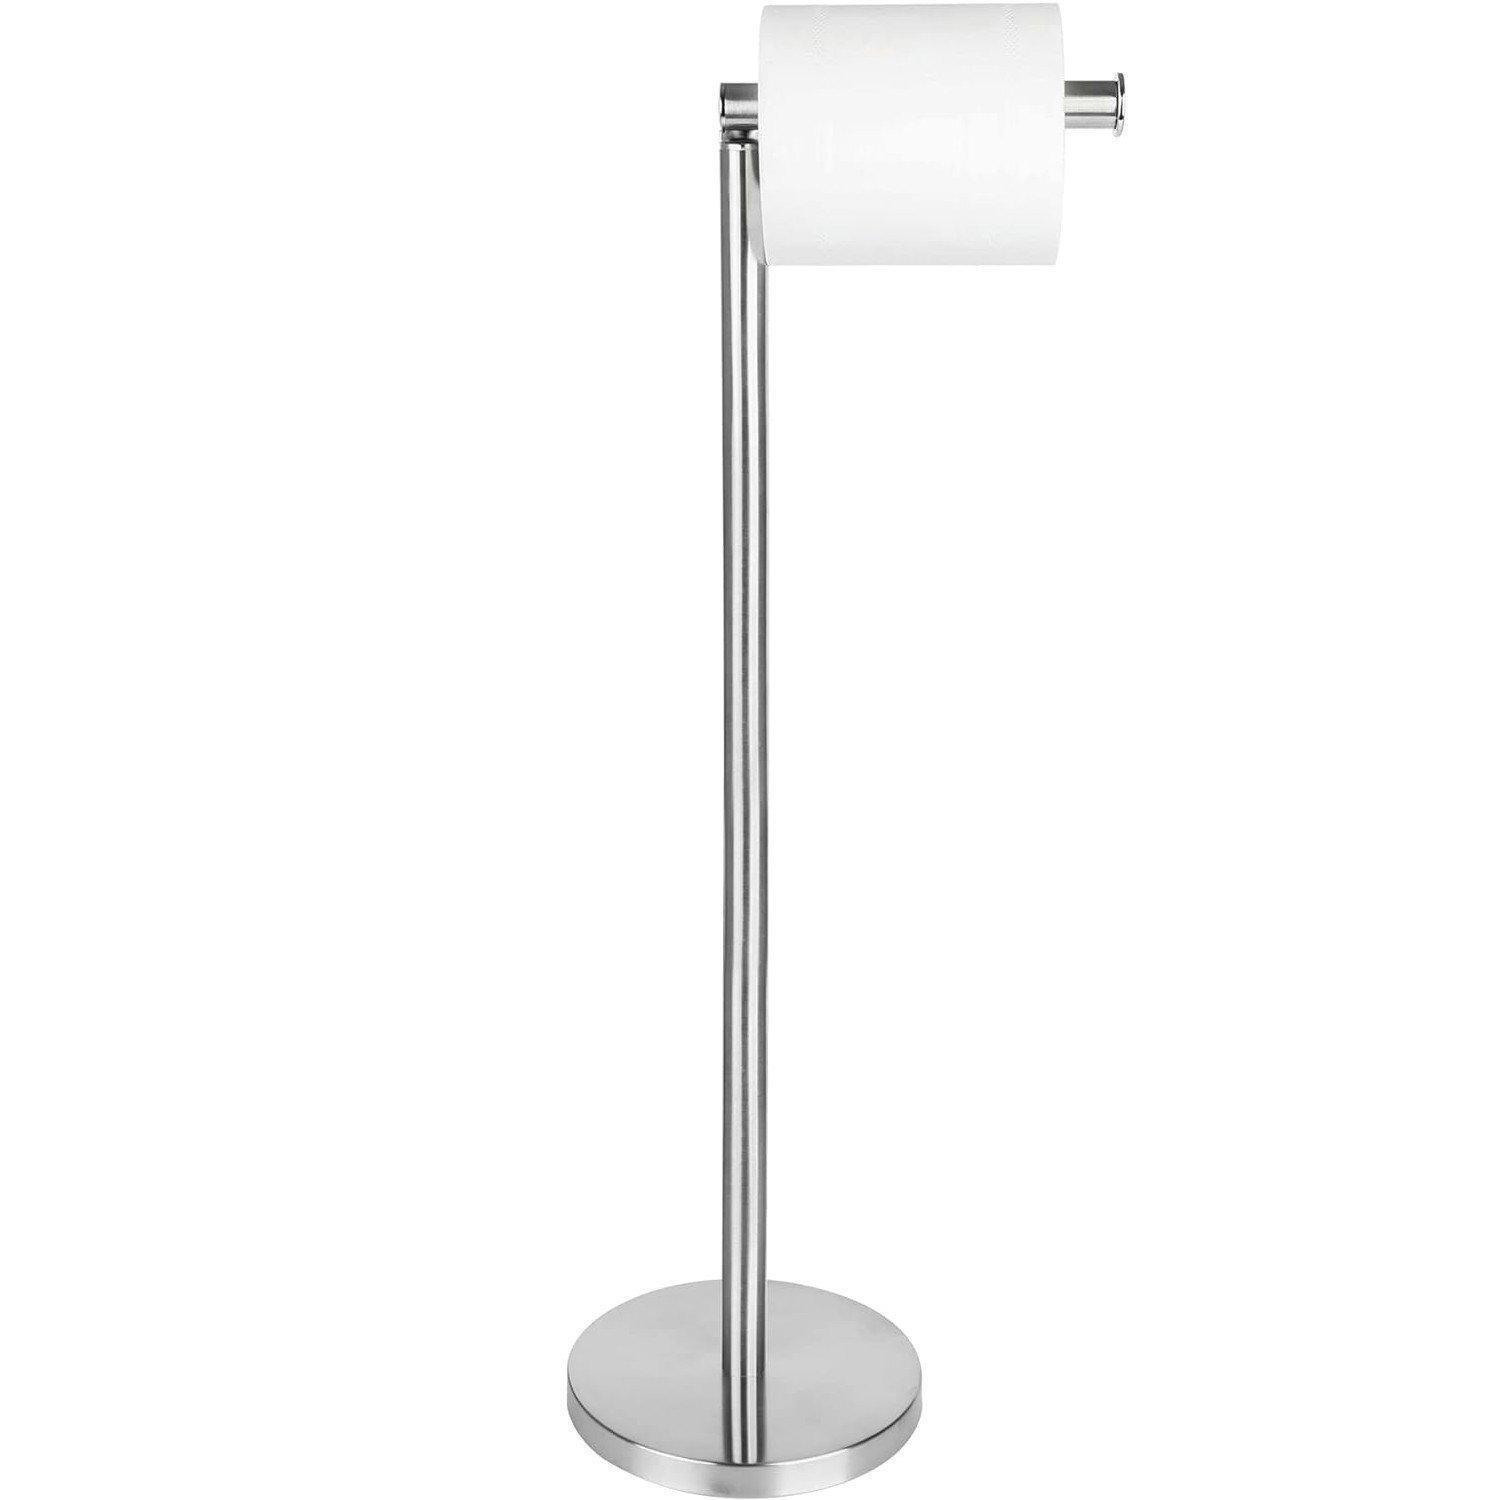 Toilet Roll Holder Freestanding Heavyweight Base Large Folding Toilet Paper Storage Holder No Drill Holds 5 Toilet Rolls Stainless Steel Chrome - image 1